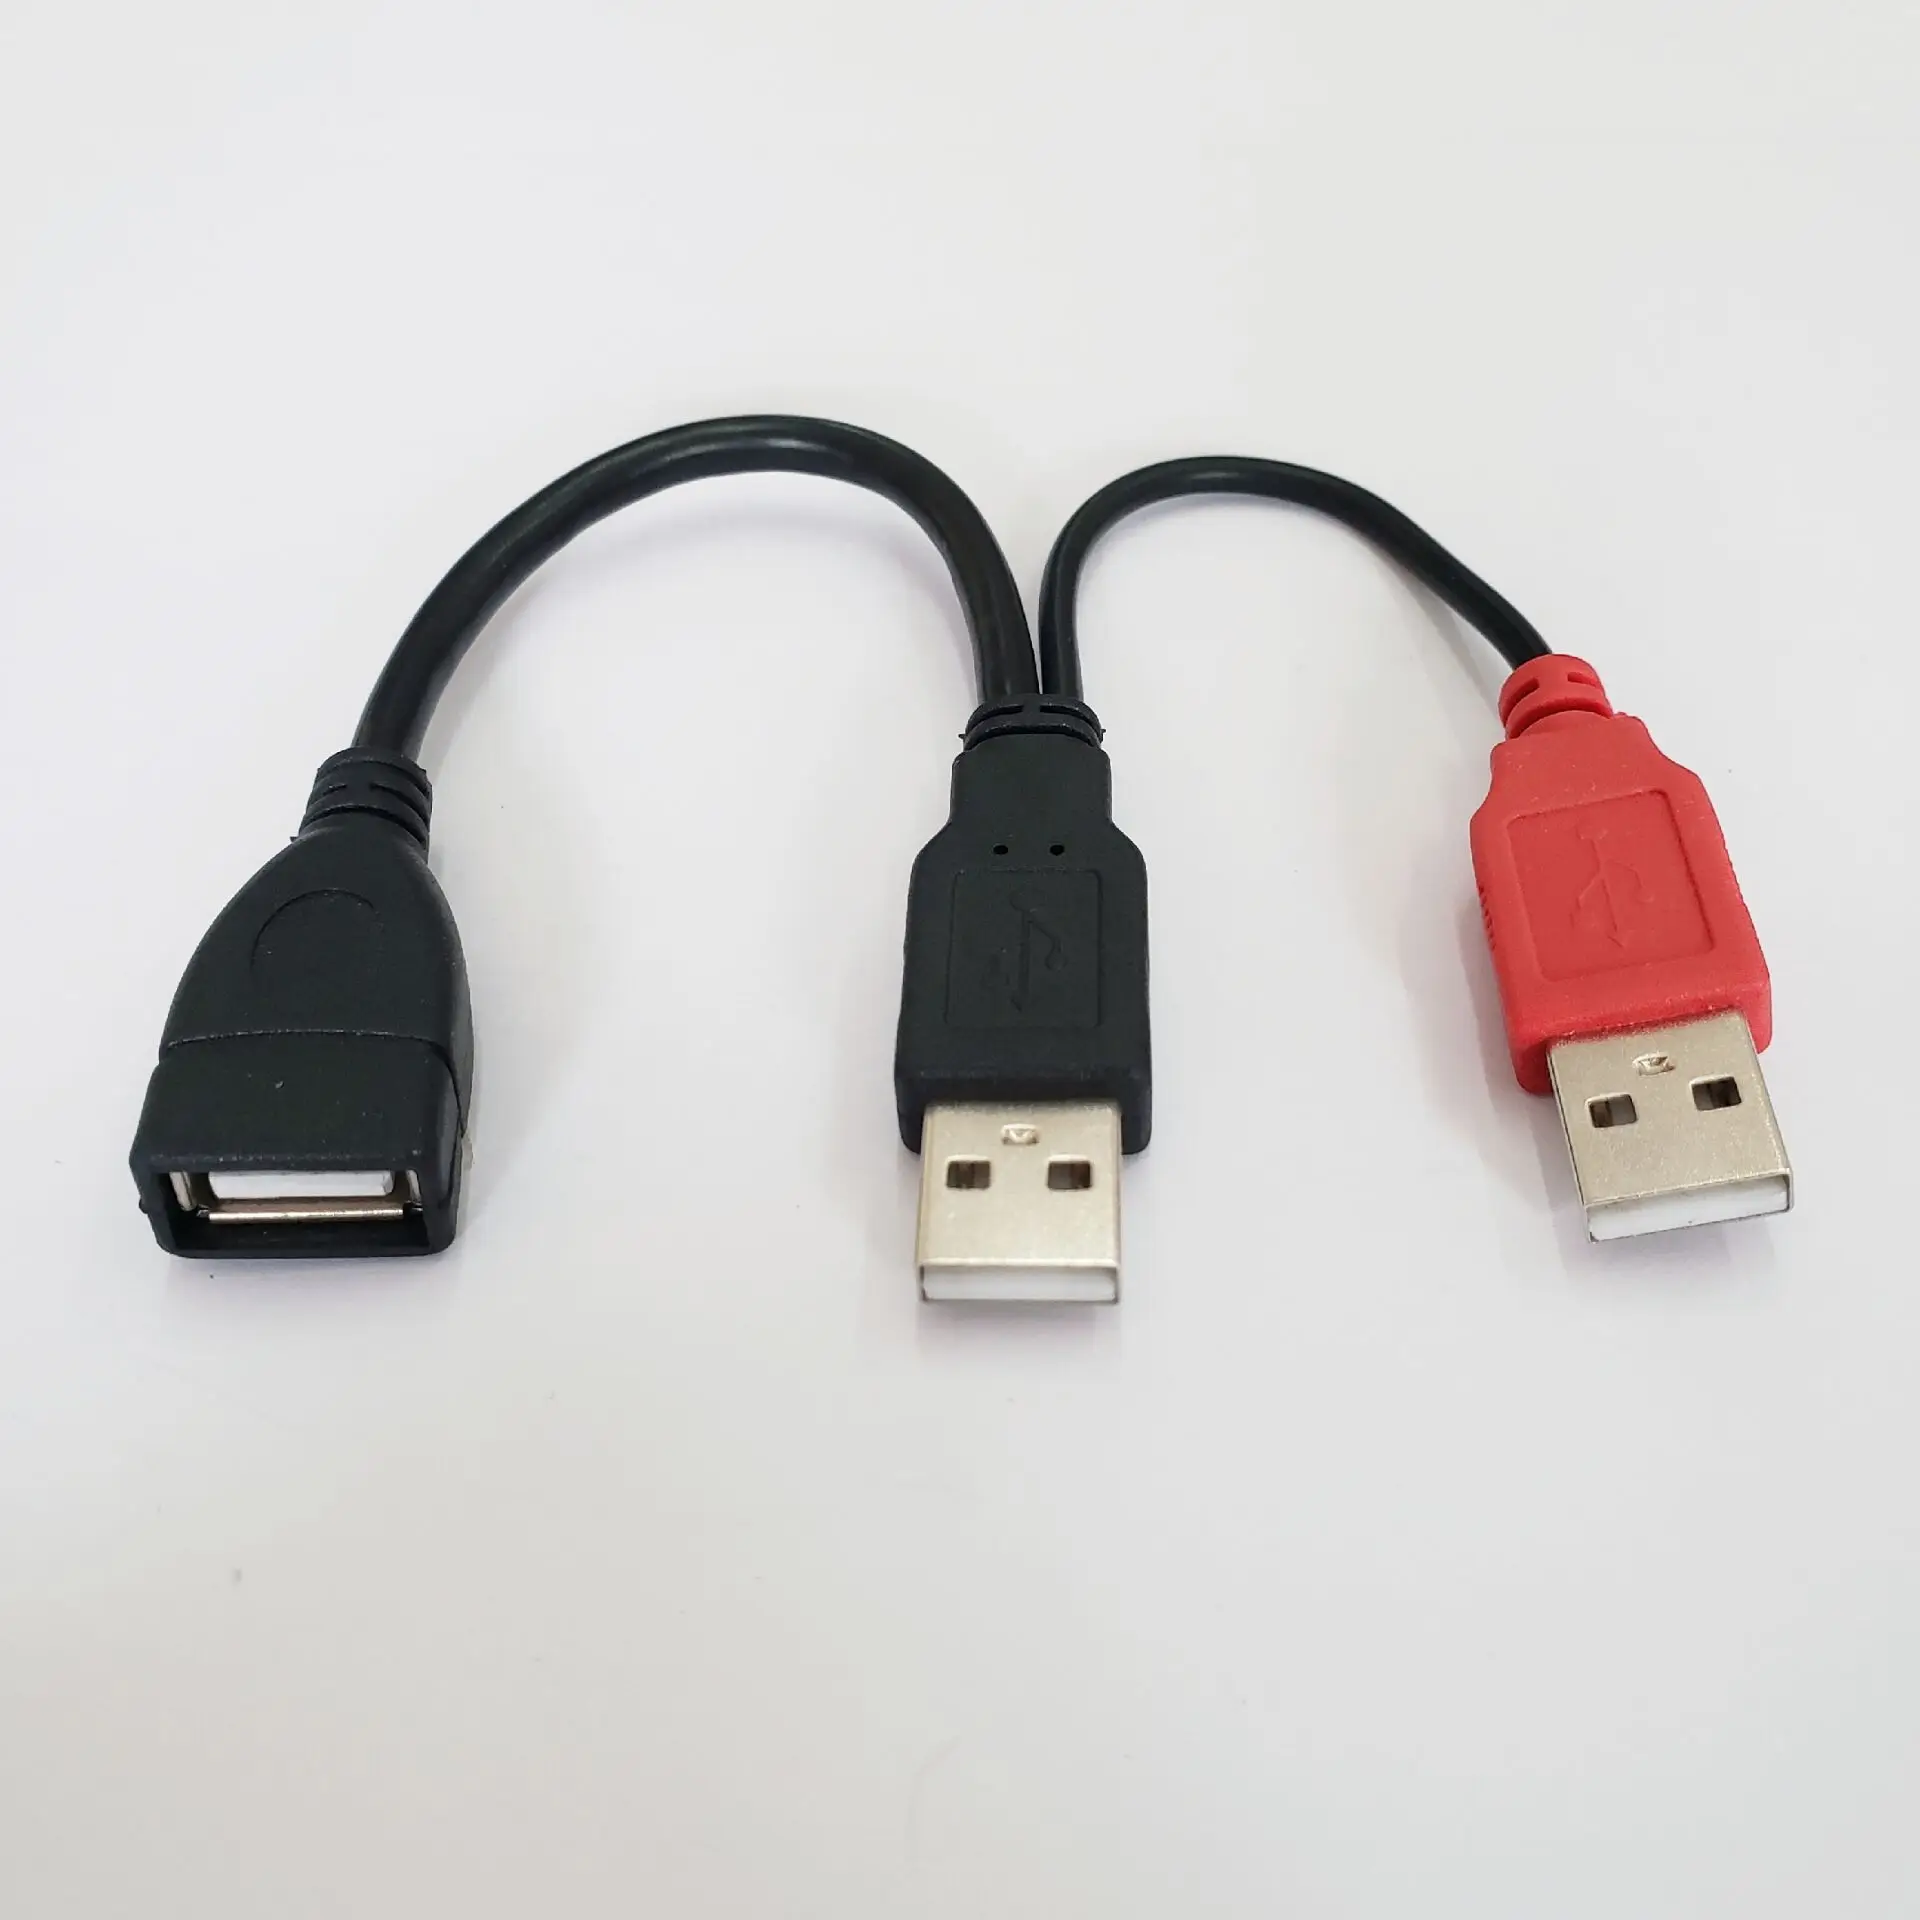 1pc USB 3.0 A Female to Dual USB Male 2.0 and 3.0 Charging Data Y Splitter Cable